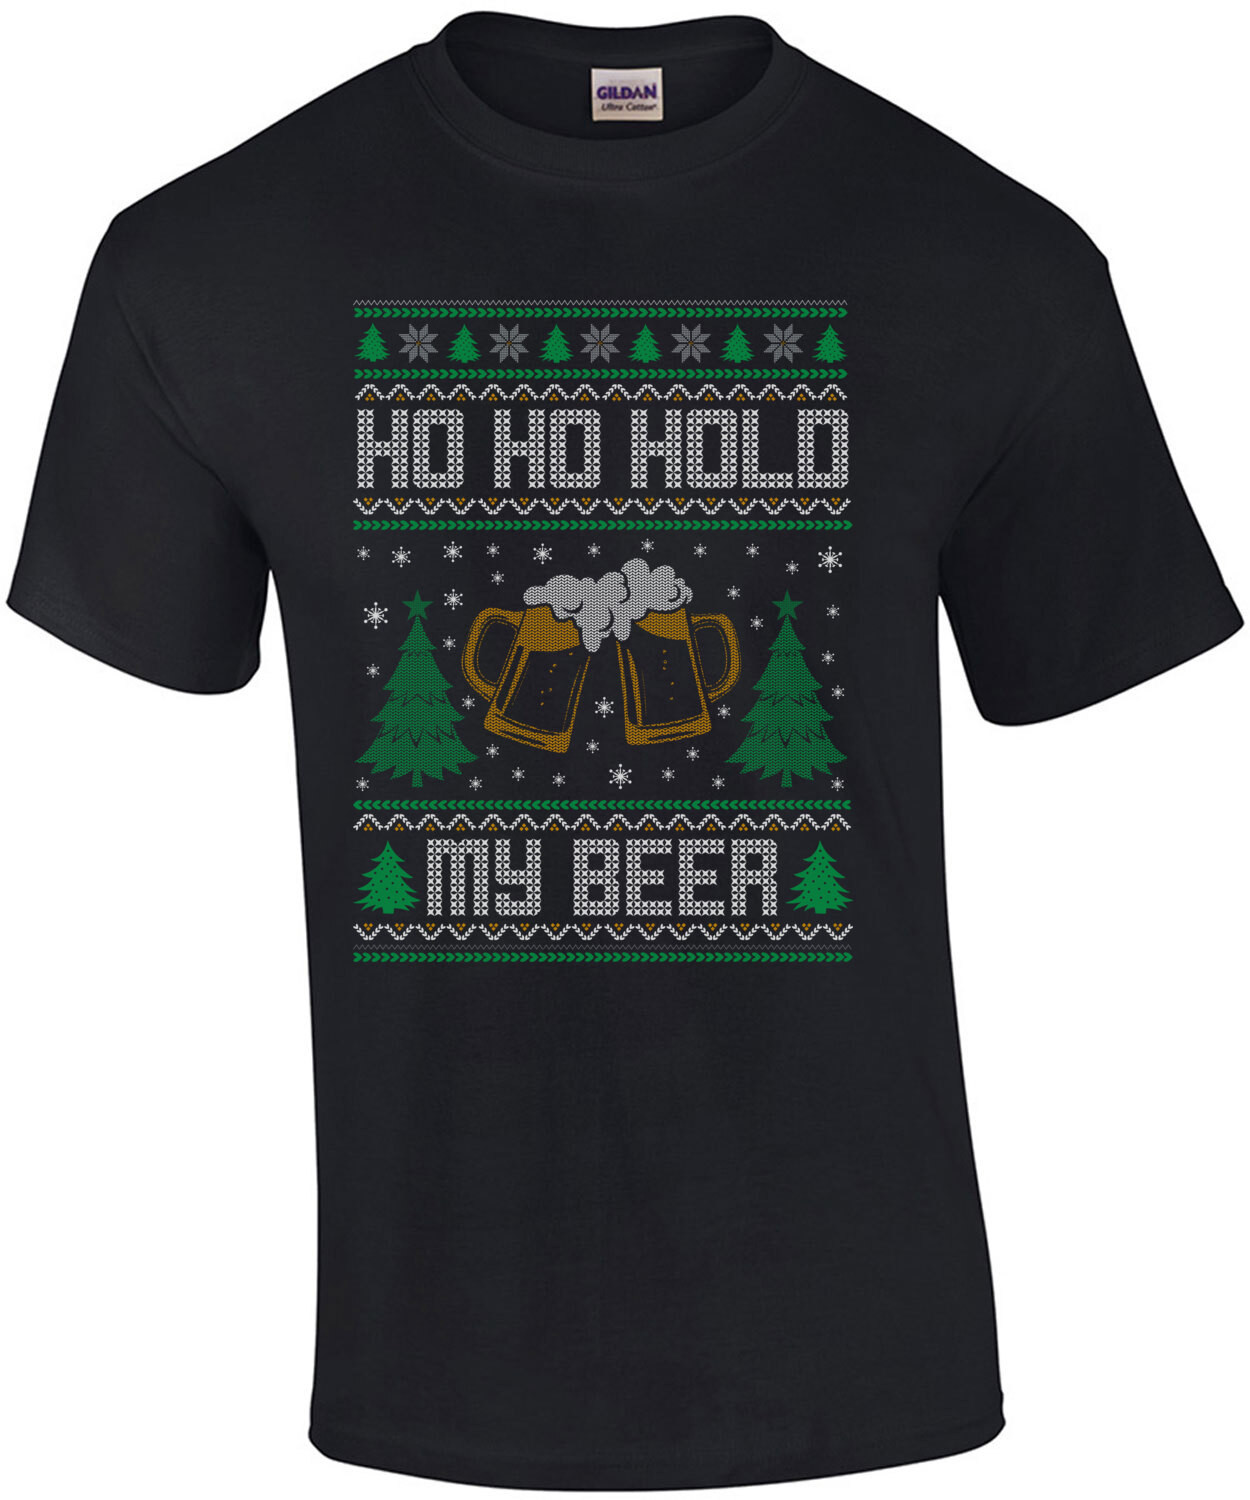 Ho Ho Hold My Beer Ugly Christmas Sweater